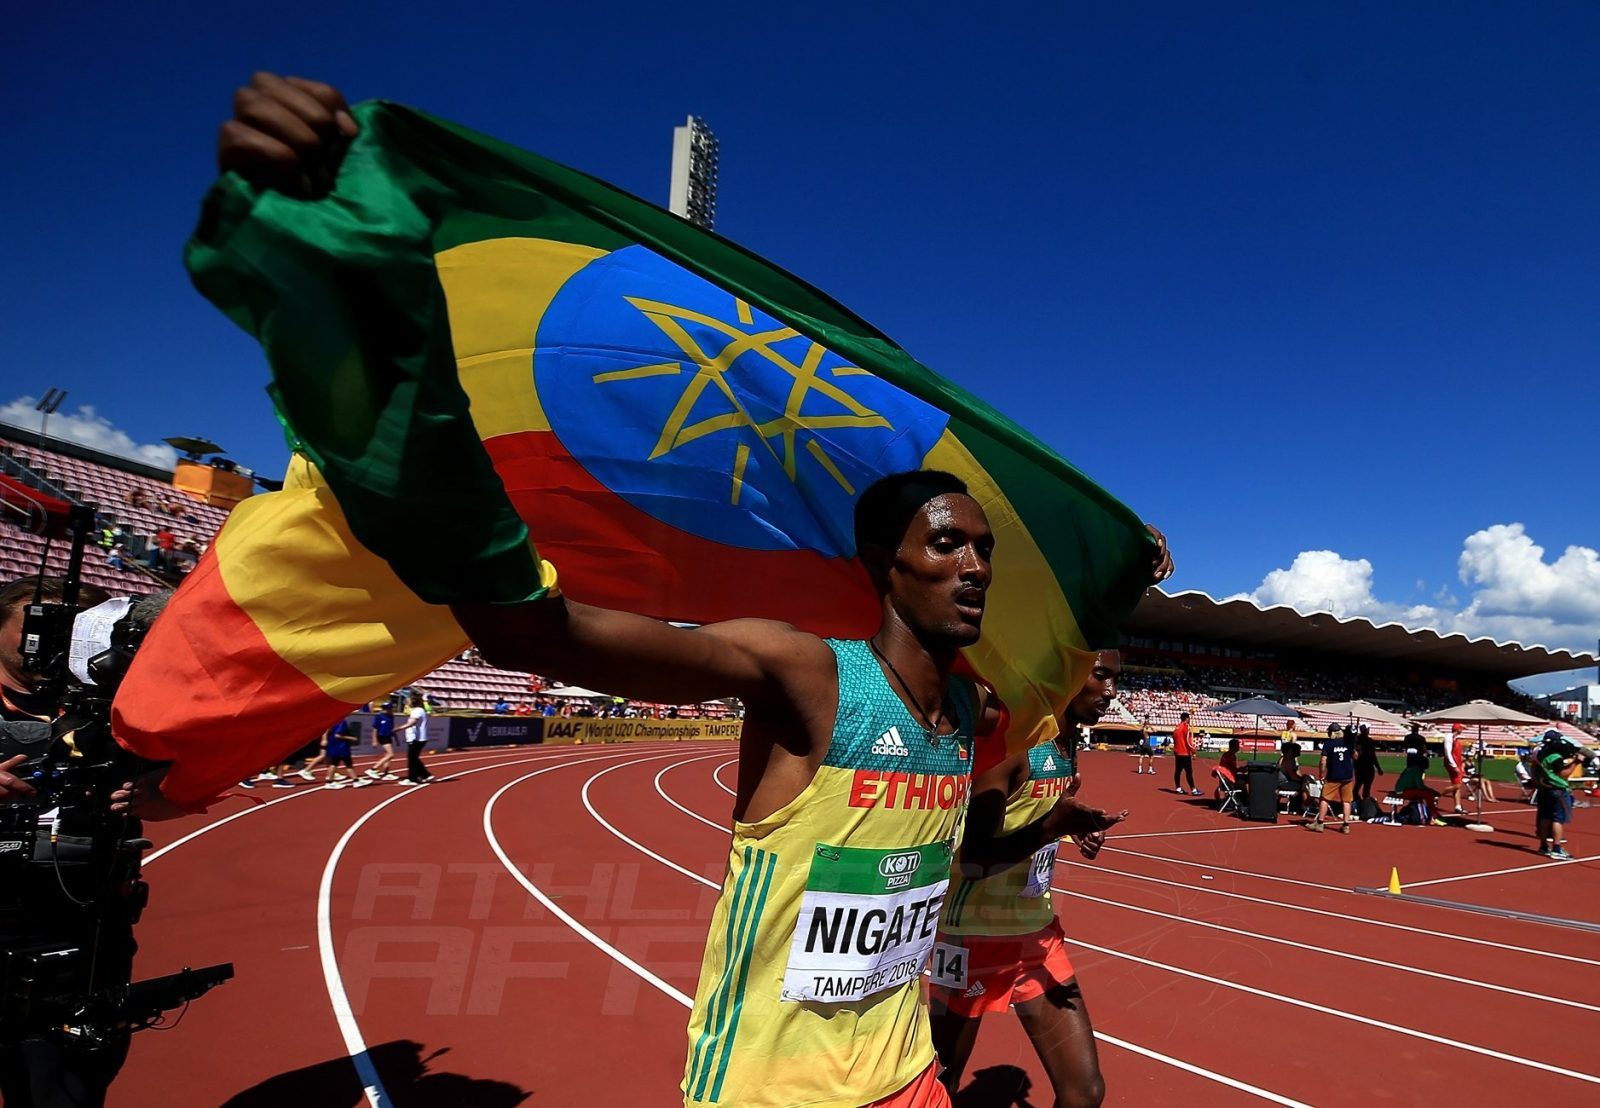 Takele Nigate of Ethiopia celebrates winning the men's 3000m steeplechase at the IAAF World U20 Championships Tampere 2018 / Photo Credit: Getty for the IAAF